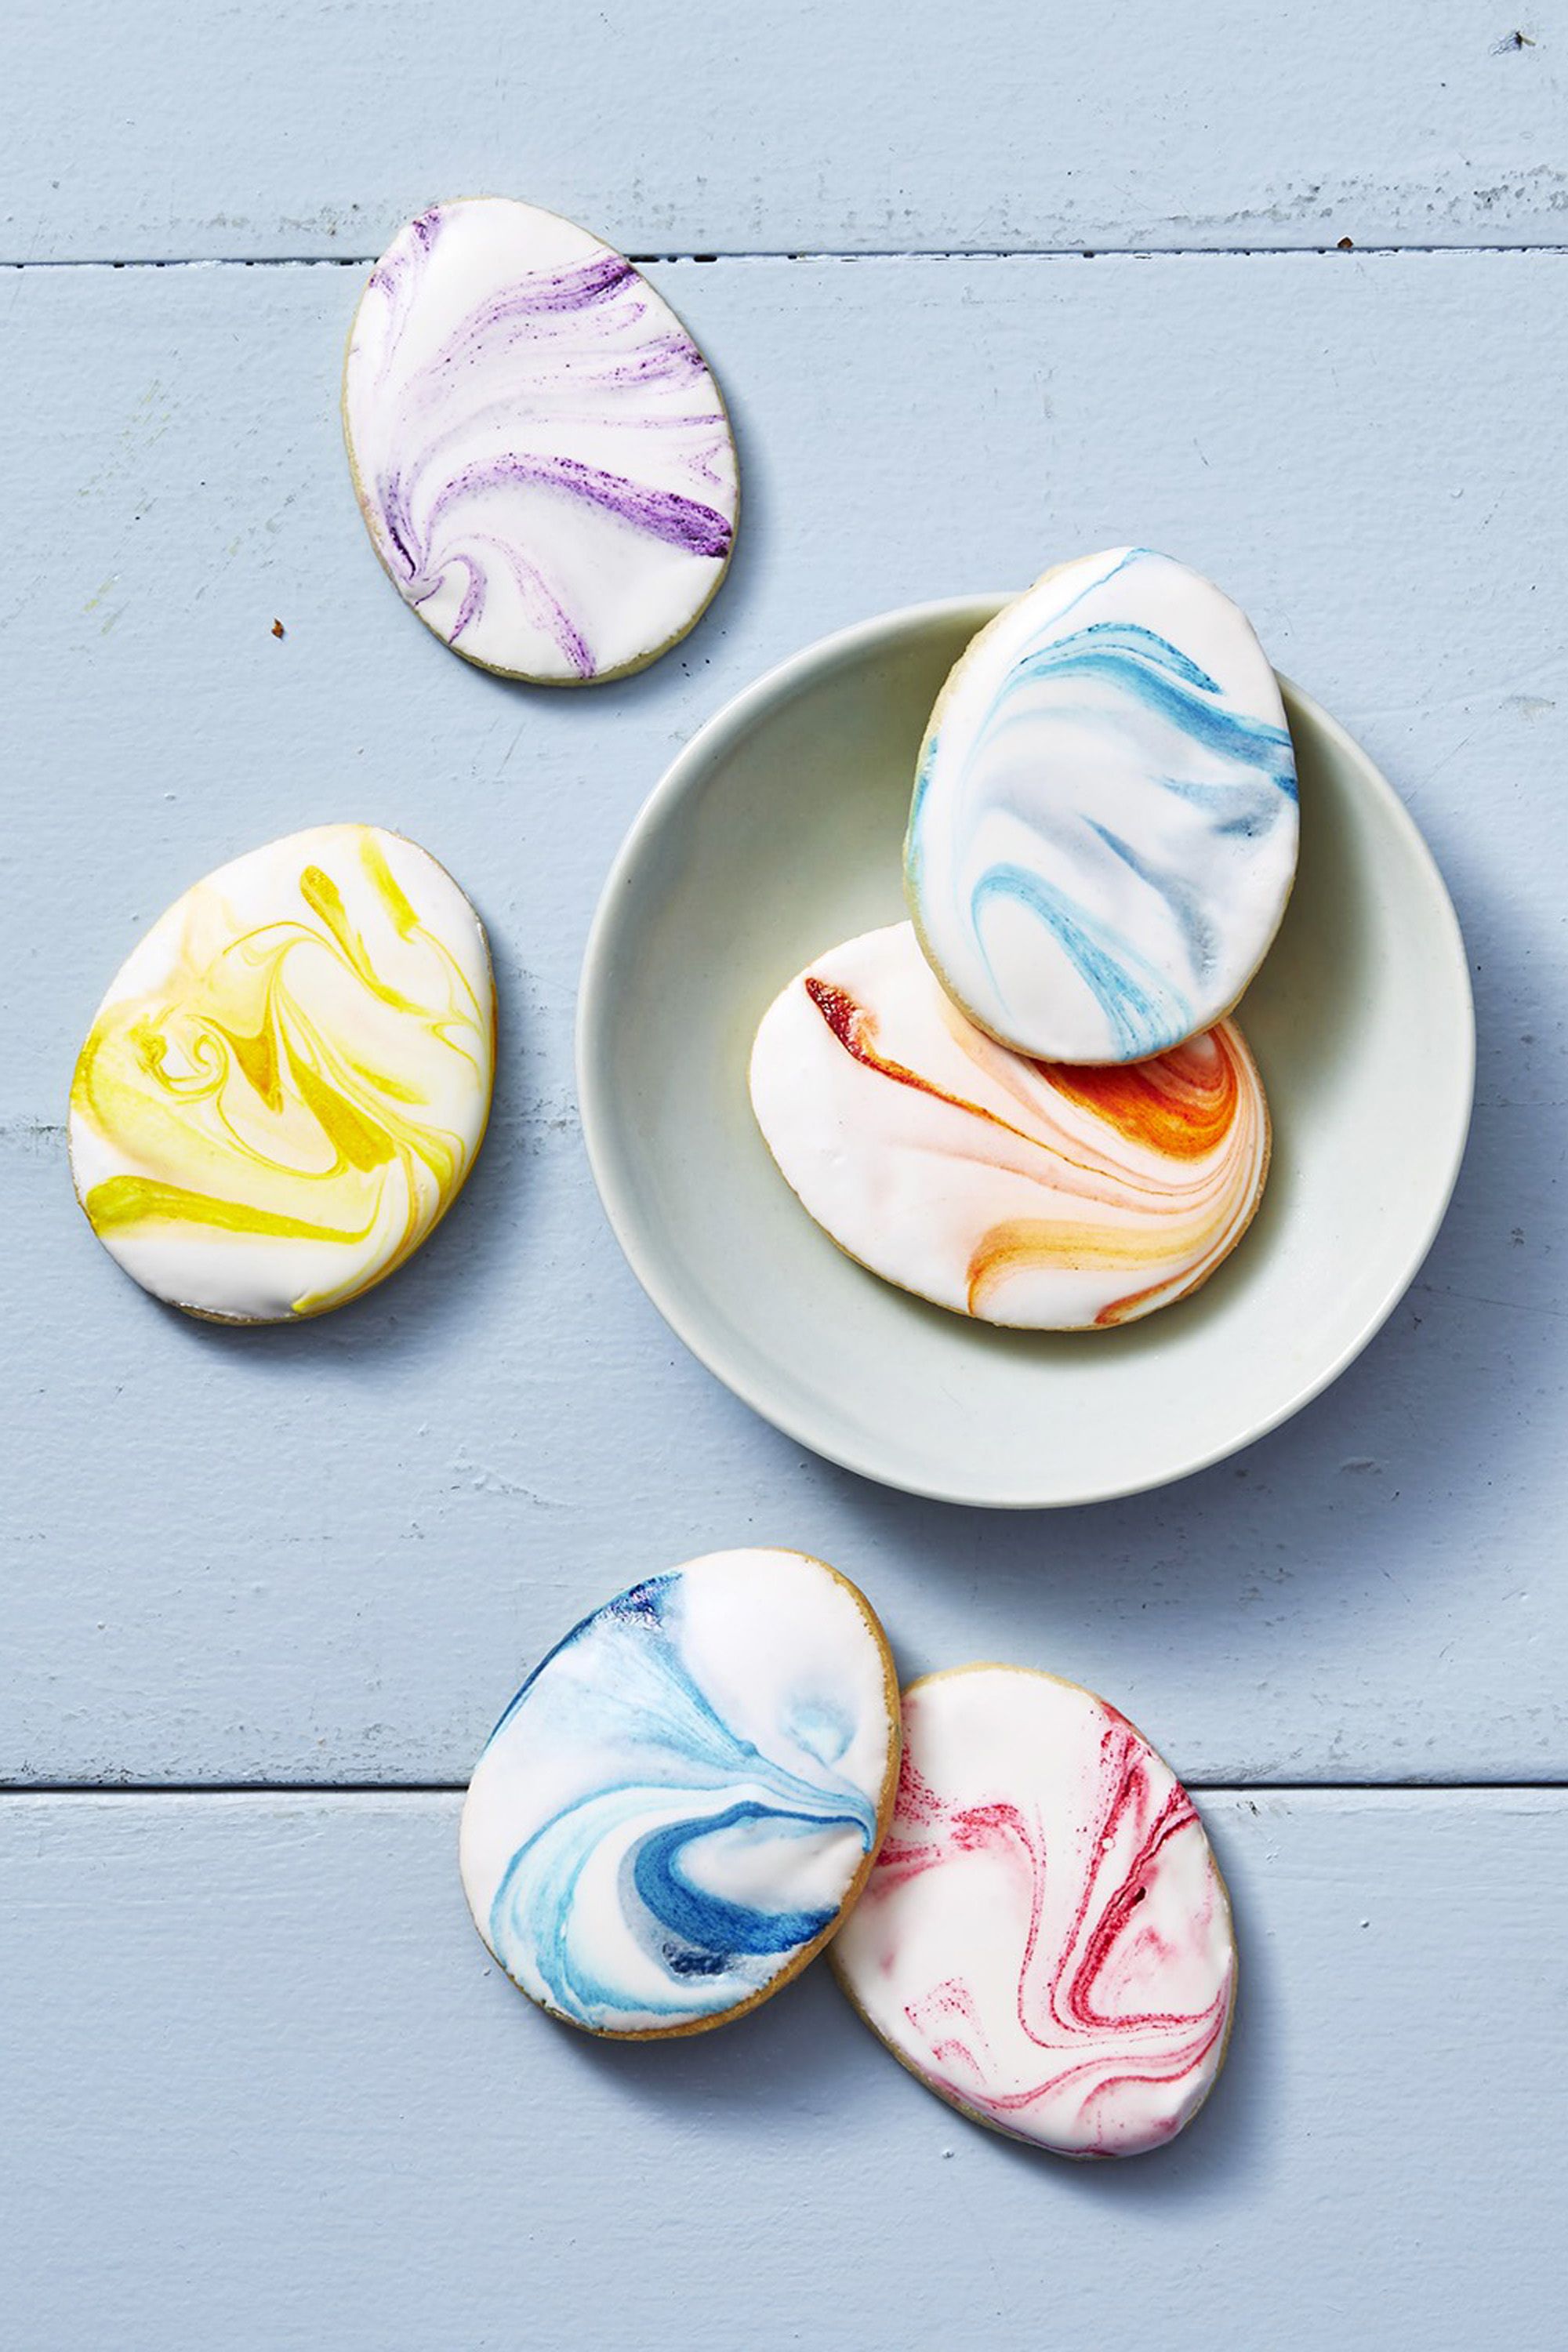 Marbled Egg Sugar Cookies Recipe - How to Make Marbled Egg Sugar Cookies